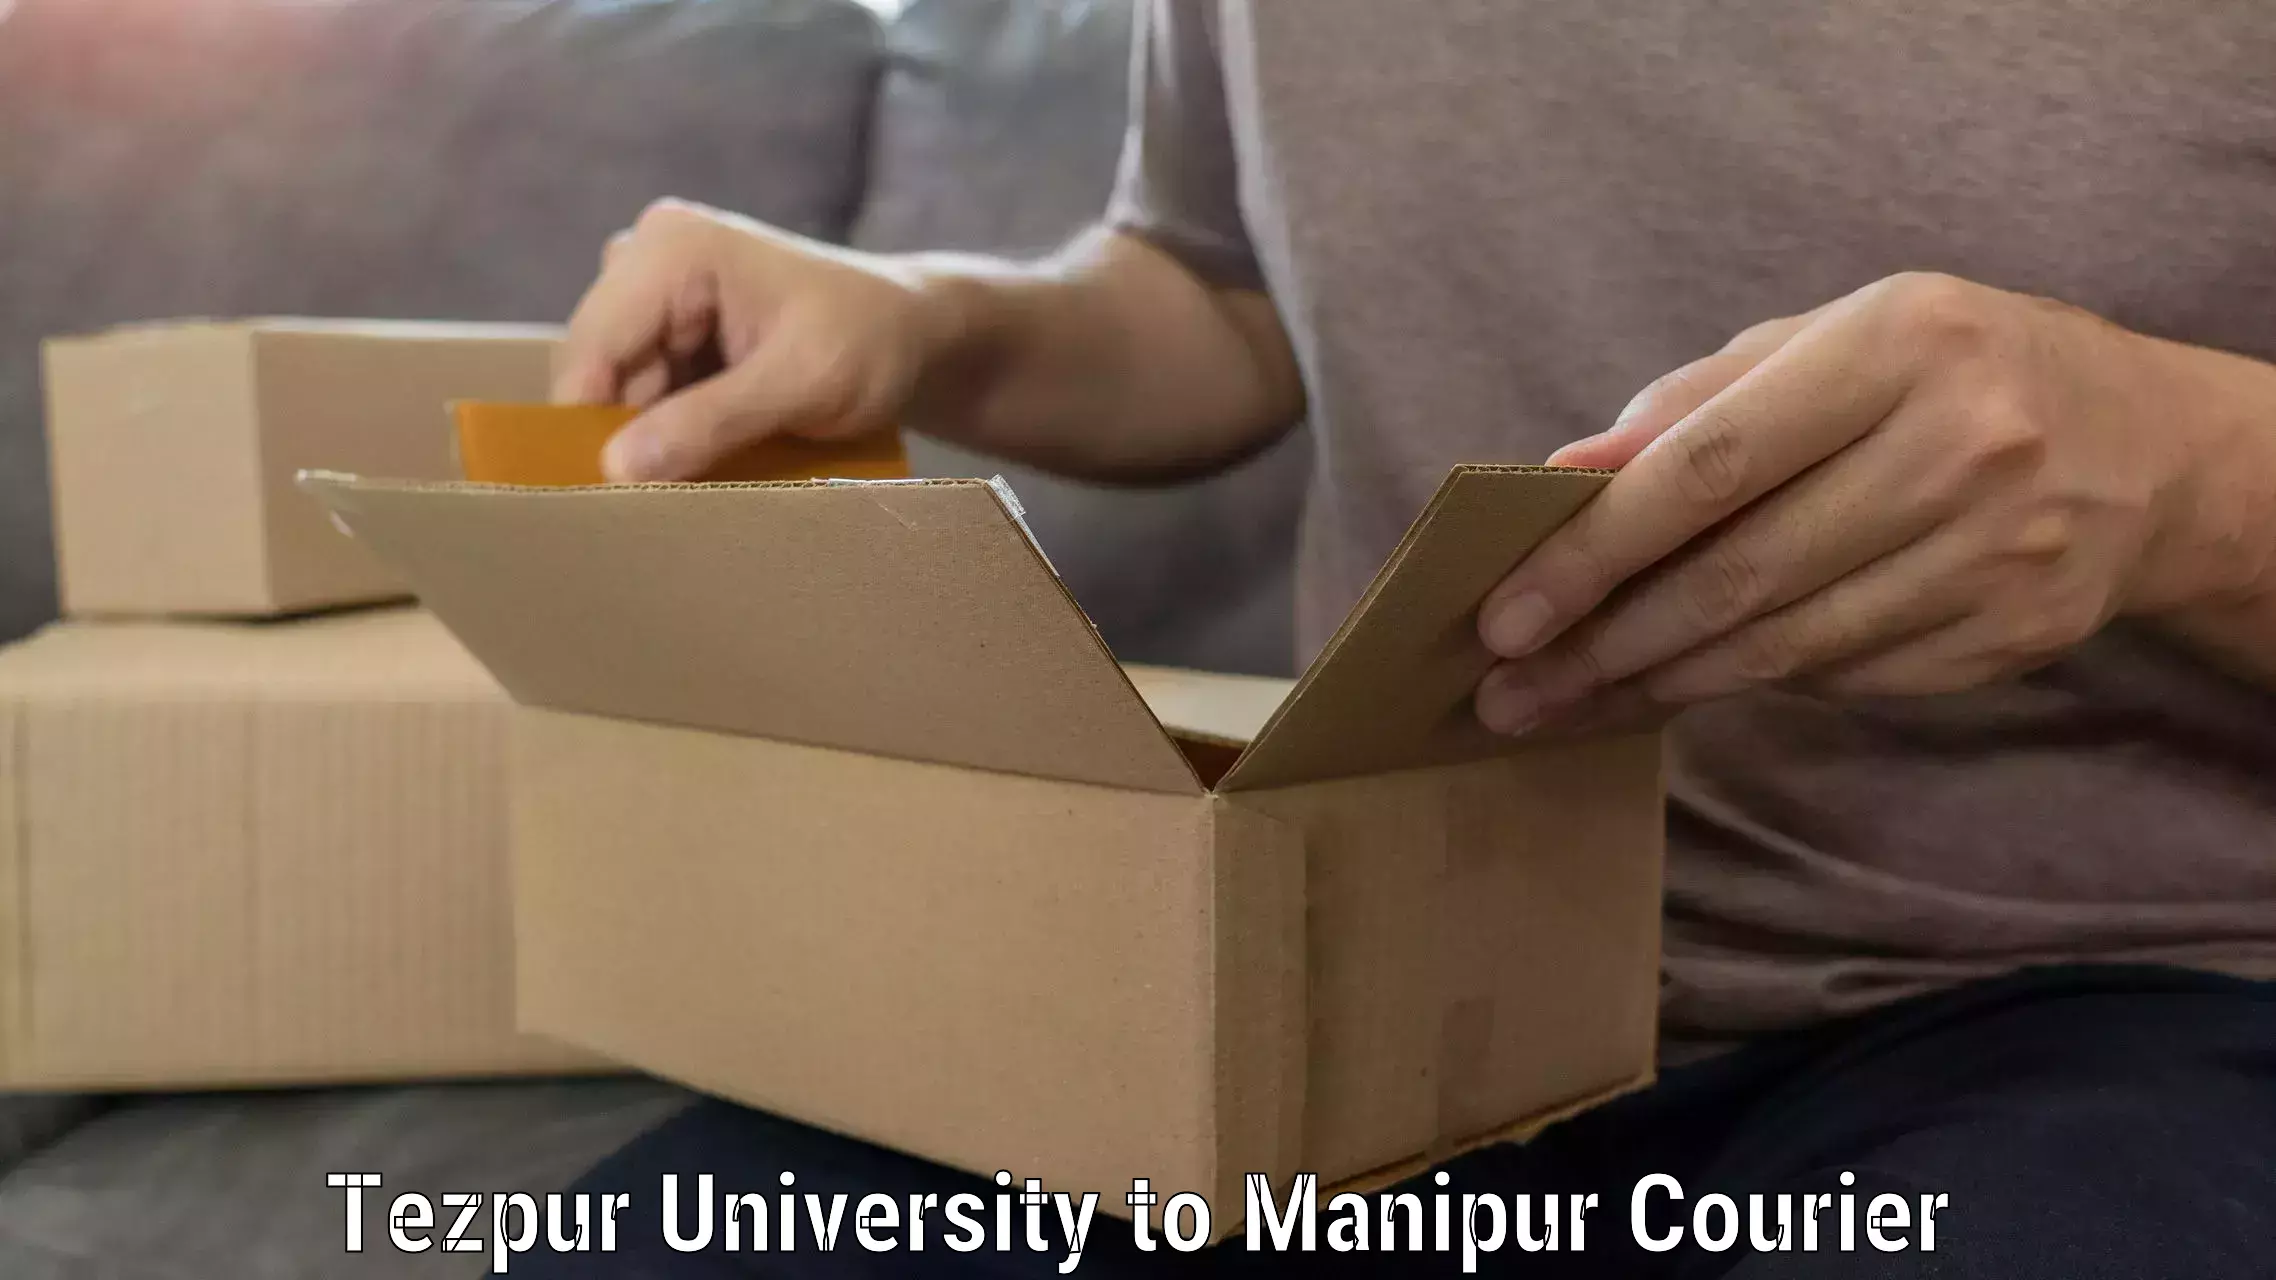 Efficient packing and moving in Tezpur University to Imphal